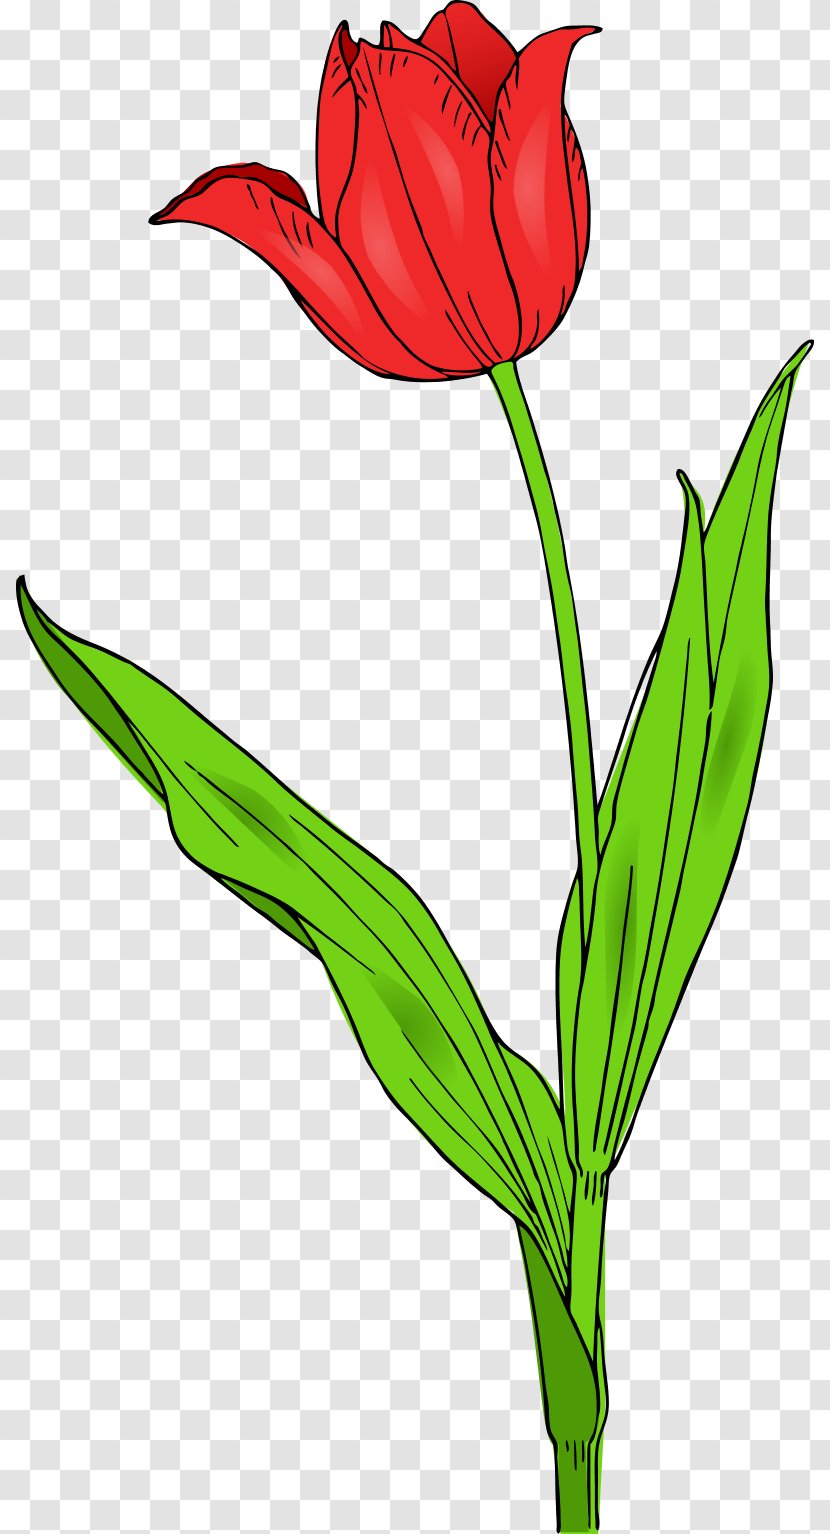 Tulipa Gesneriana Flower Free Content Clip Art - Plant - Microsoft Office Clipart Transparent PNG